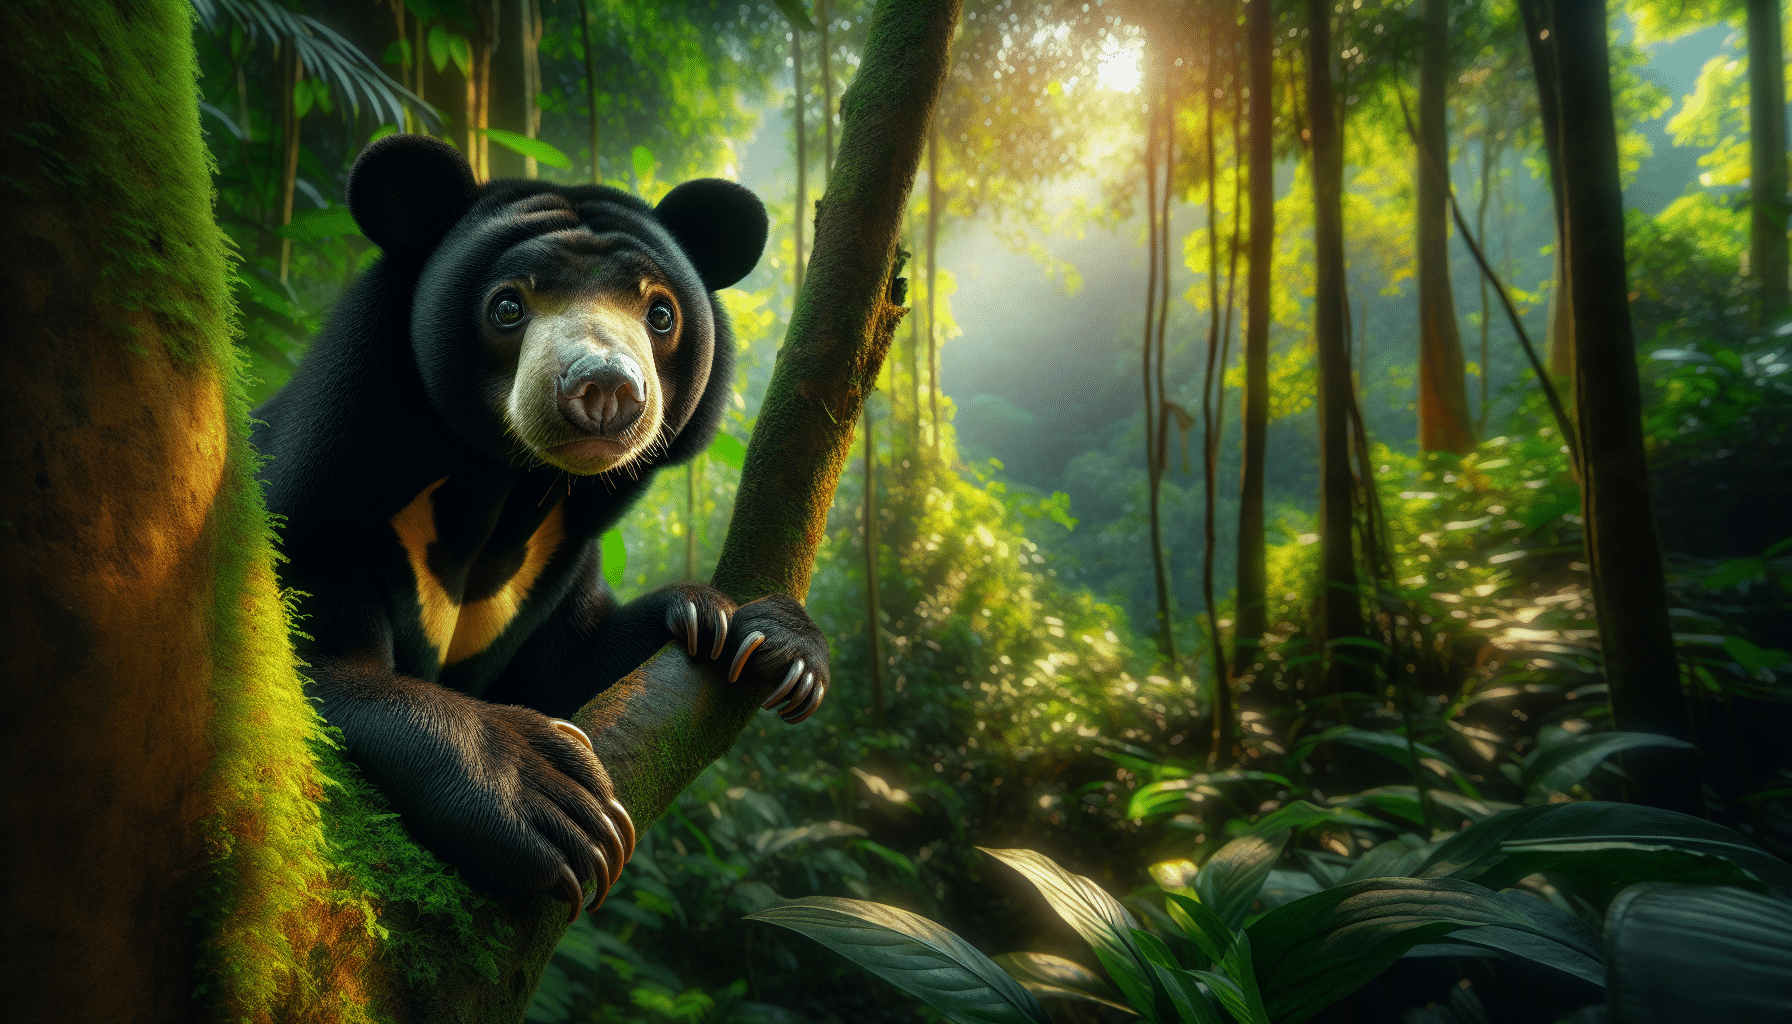 Depict a vivid picture of a Sun Bear, scientific name Helarctos malayanus, in its natural habitat. Perhaps, it can be exploring the jungle, climbing a tree, or eating fruits. The focus should solely be on the bear and no other animals or humans should be in the frame. Remember to avoid including text or brand logos. Show the bear's distinctive features such as its dark black fur, its small ears, its crescent-shaped chest marking, and its long claws to make it easily identifiable as a Sun Bear. Also, highlight the dense tropical rainforest surrounding it.